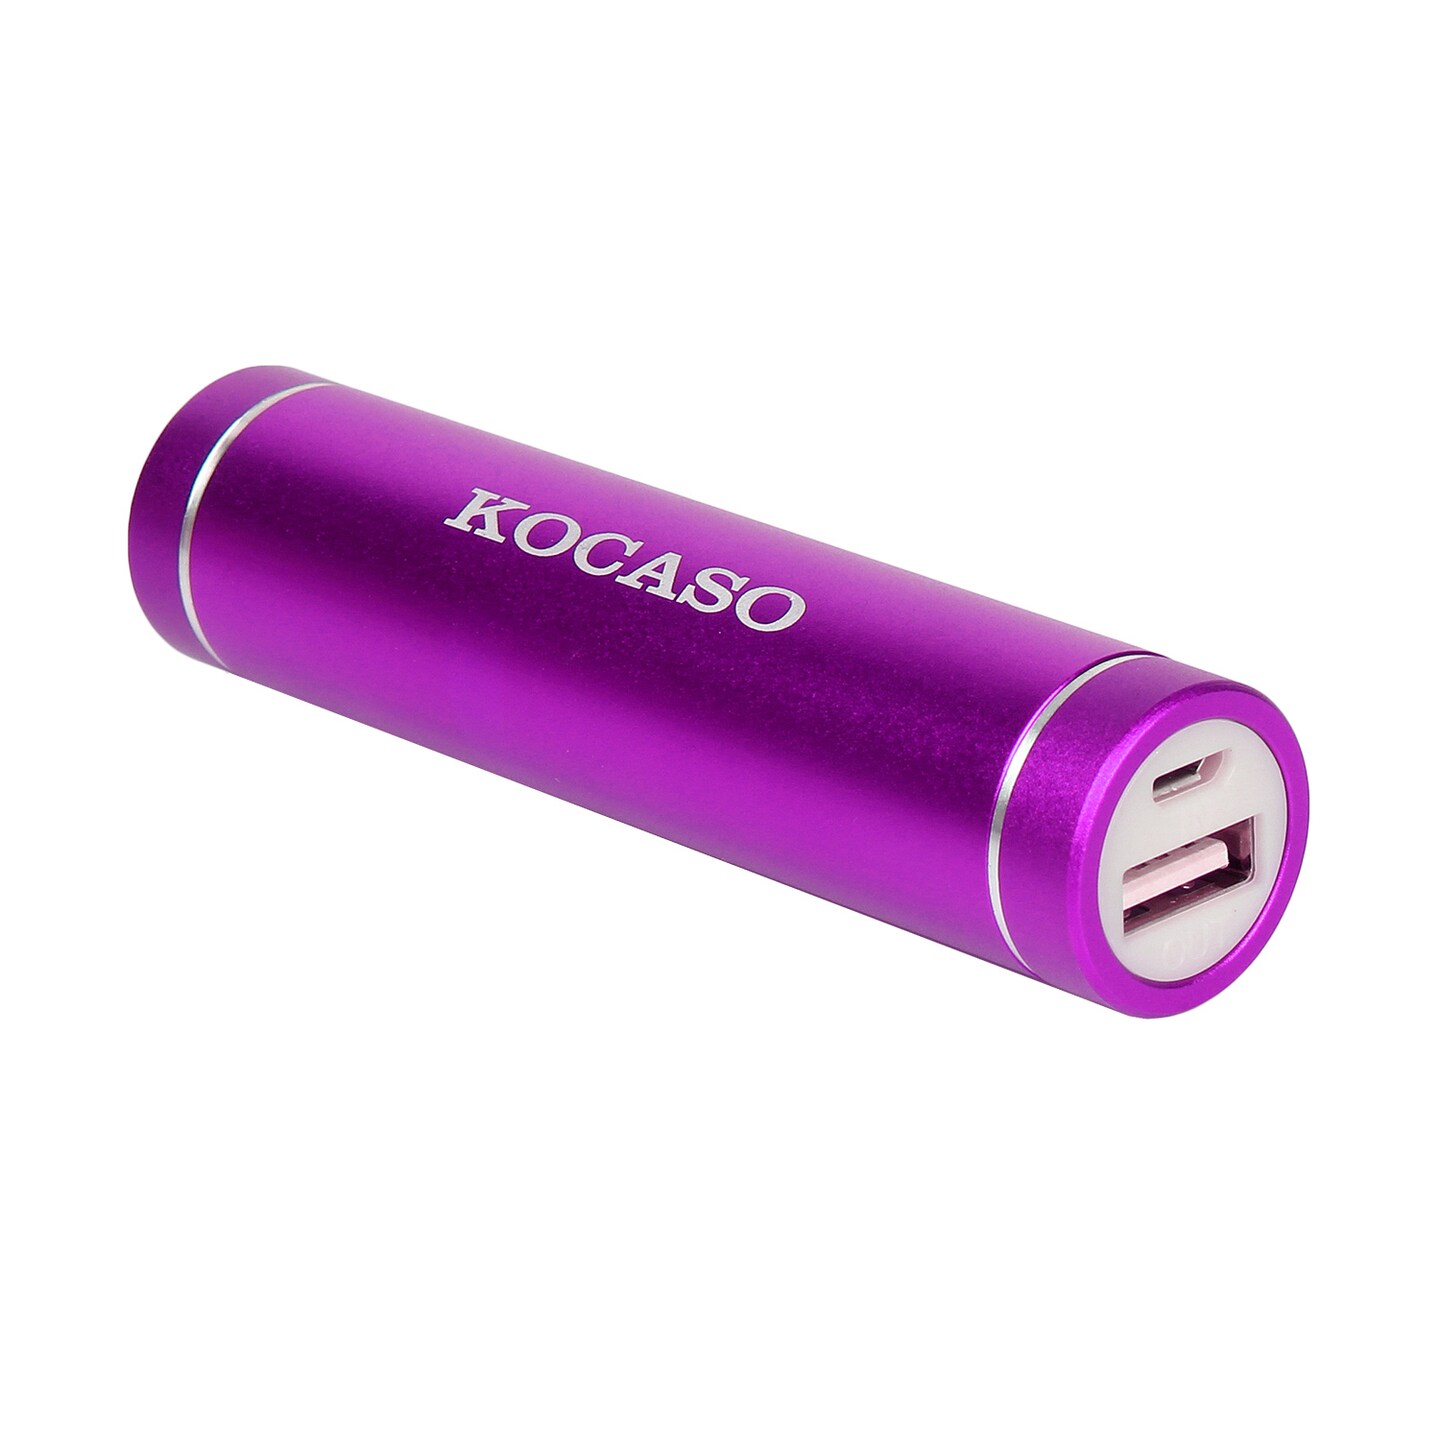 Global Phoenix 2600mAh Mobile Power Bank Portable for iPhone iPod MP3 GPS All Smart Phones in Pink